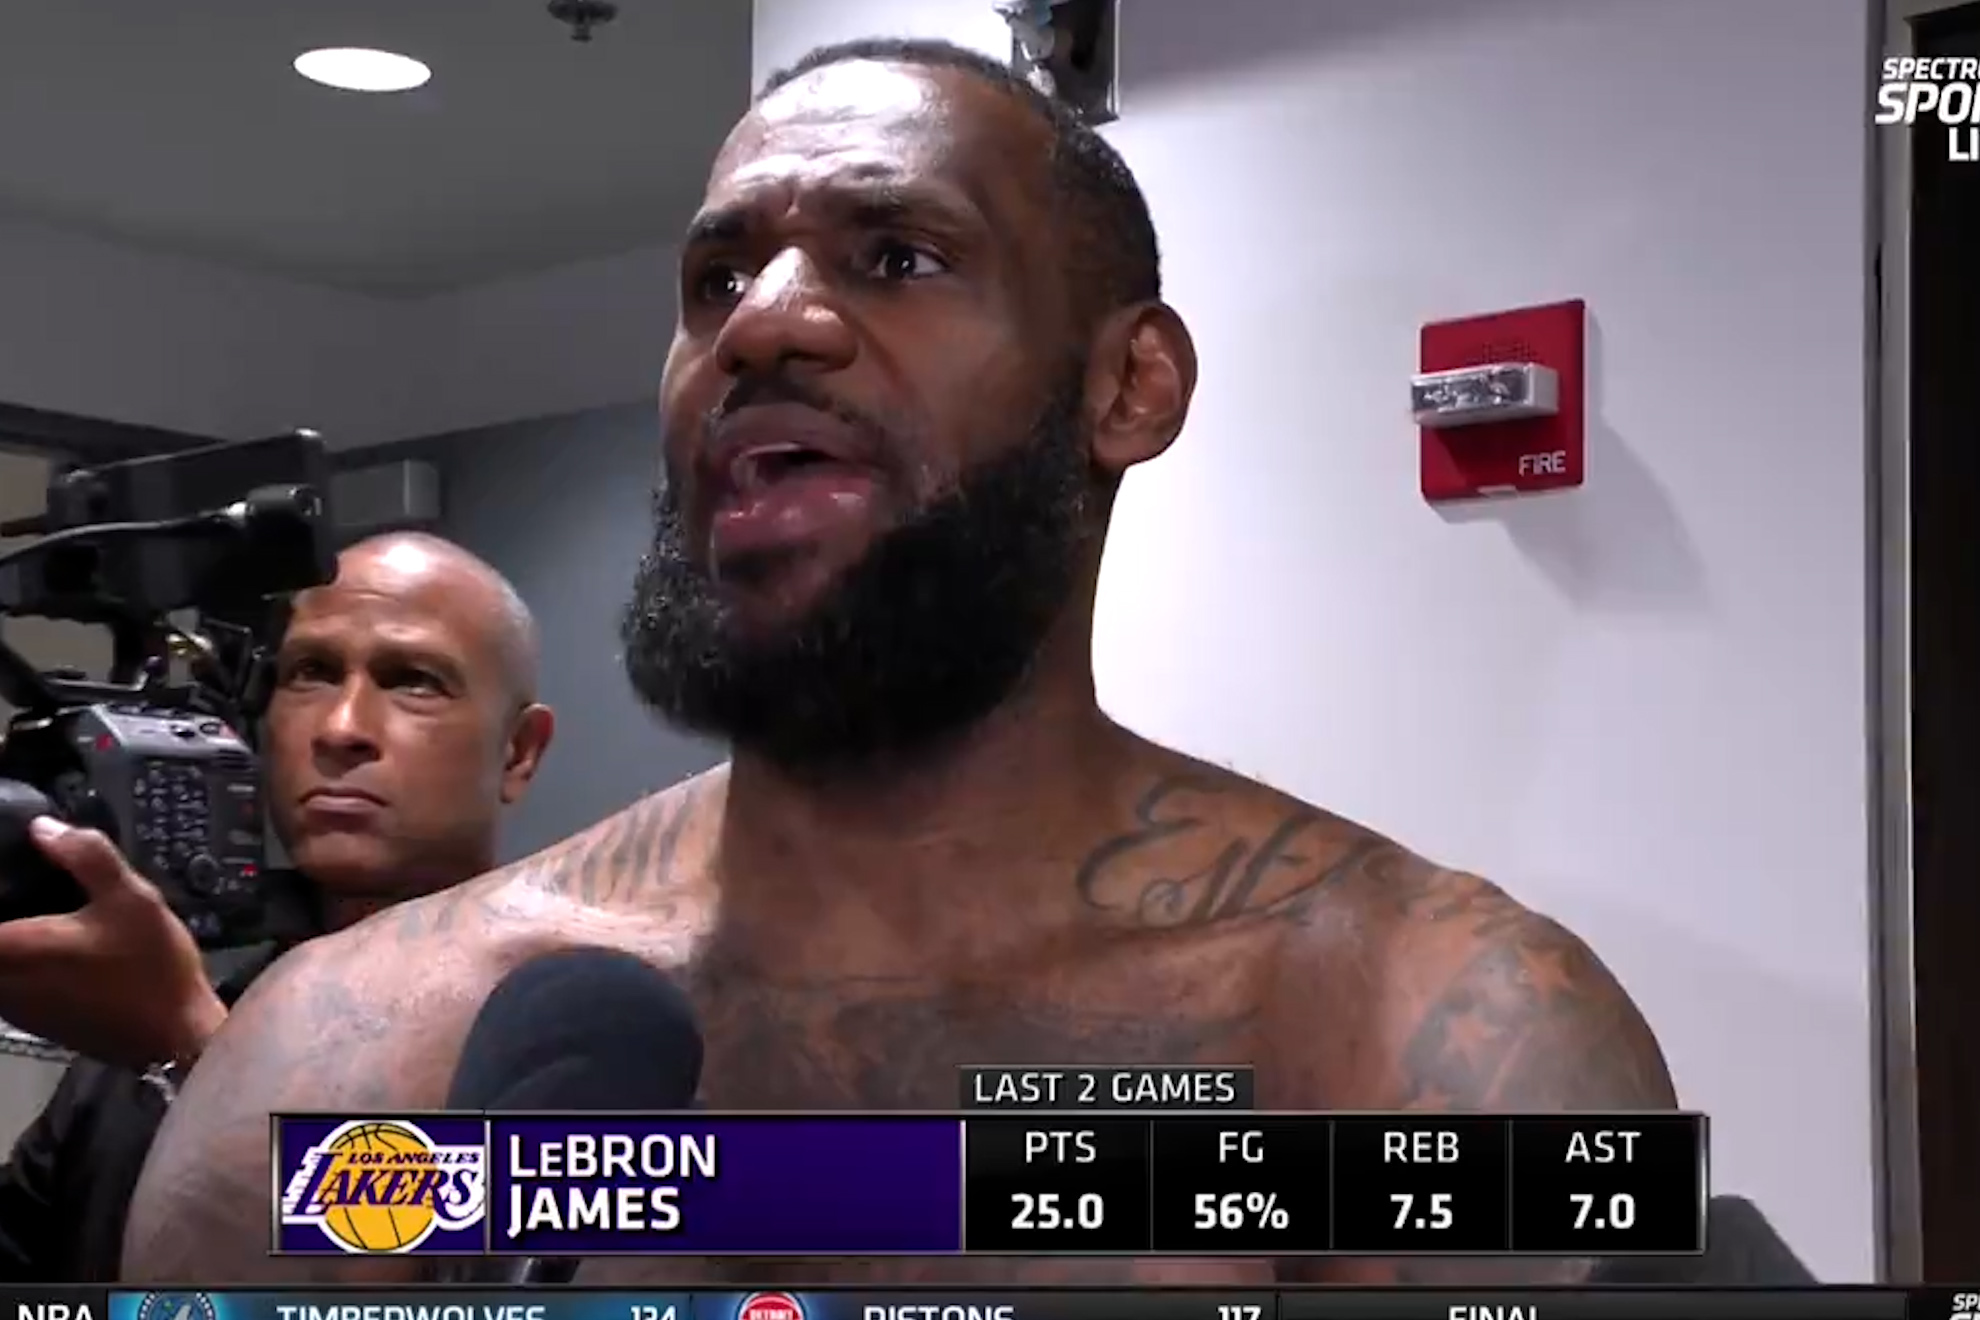 LeBron James reacts to Bronnys teammates bad plays during interview